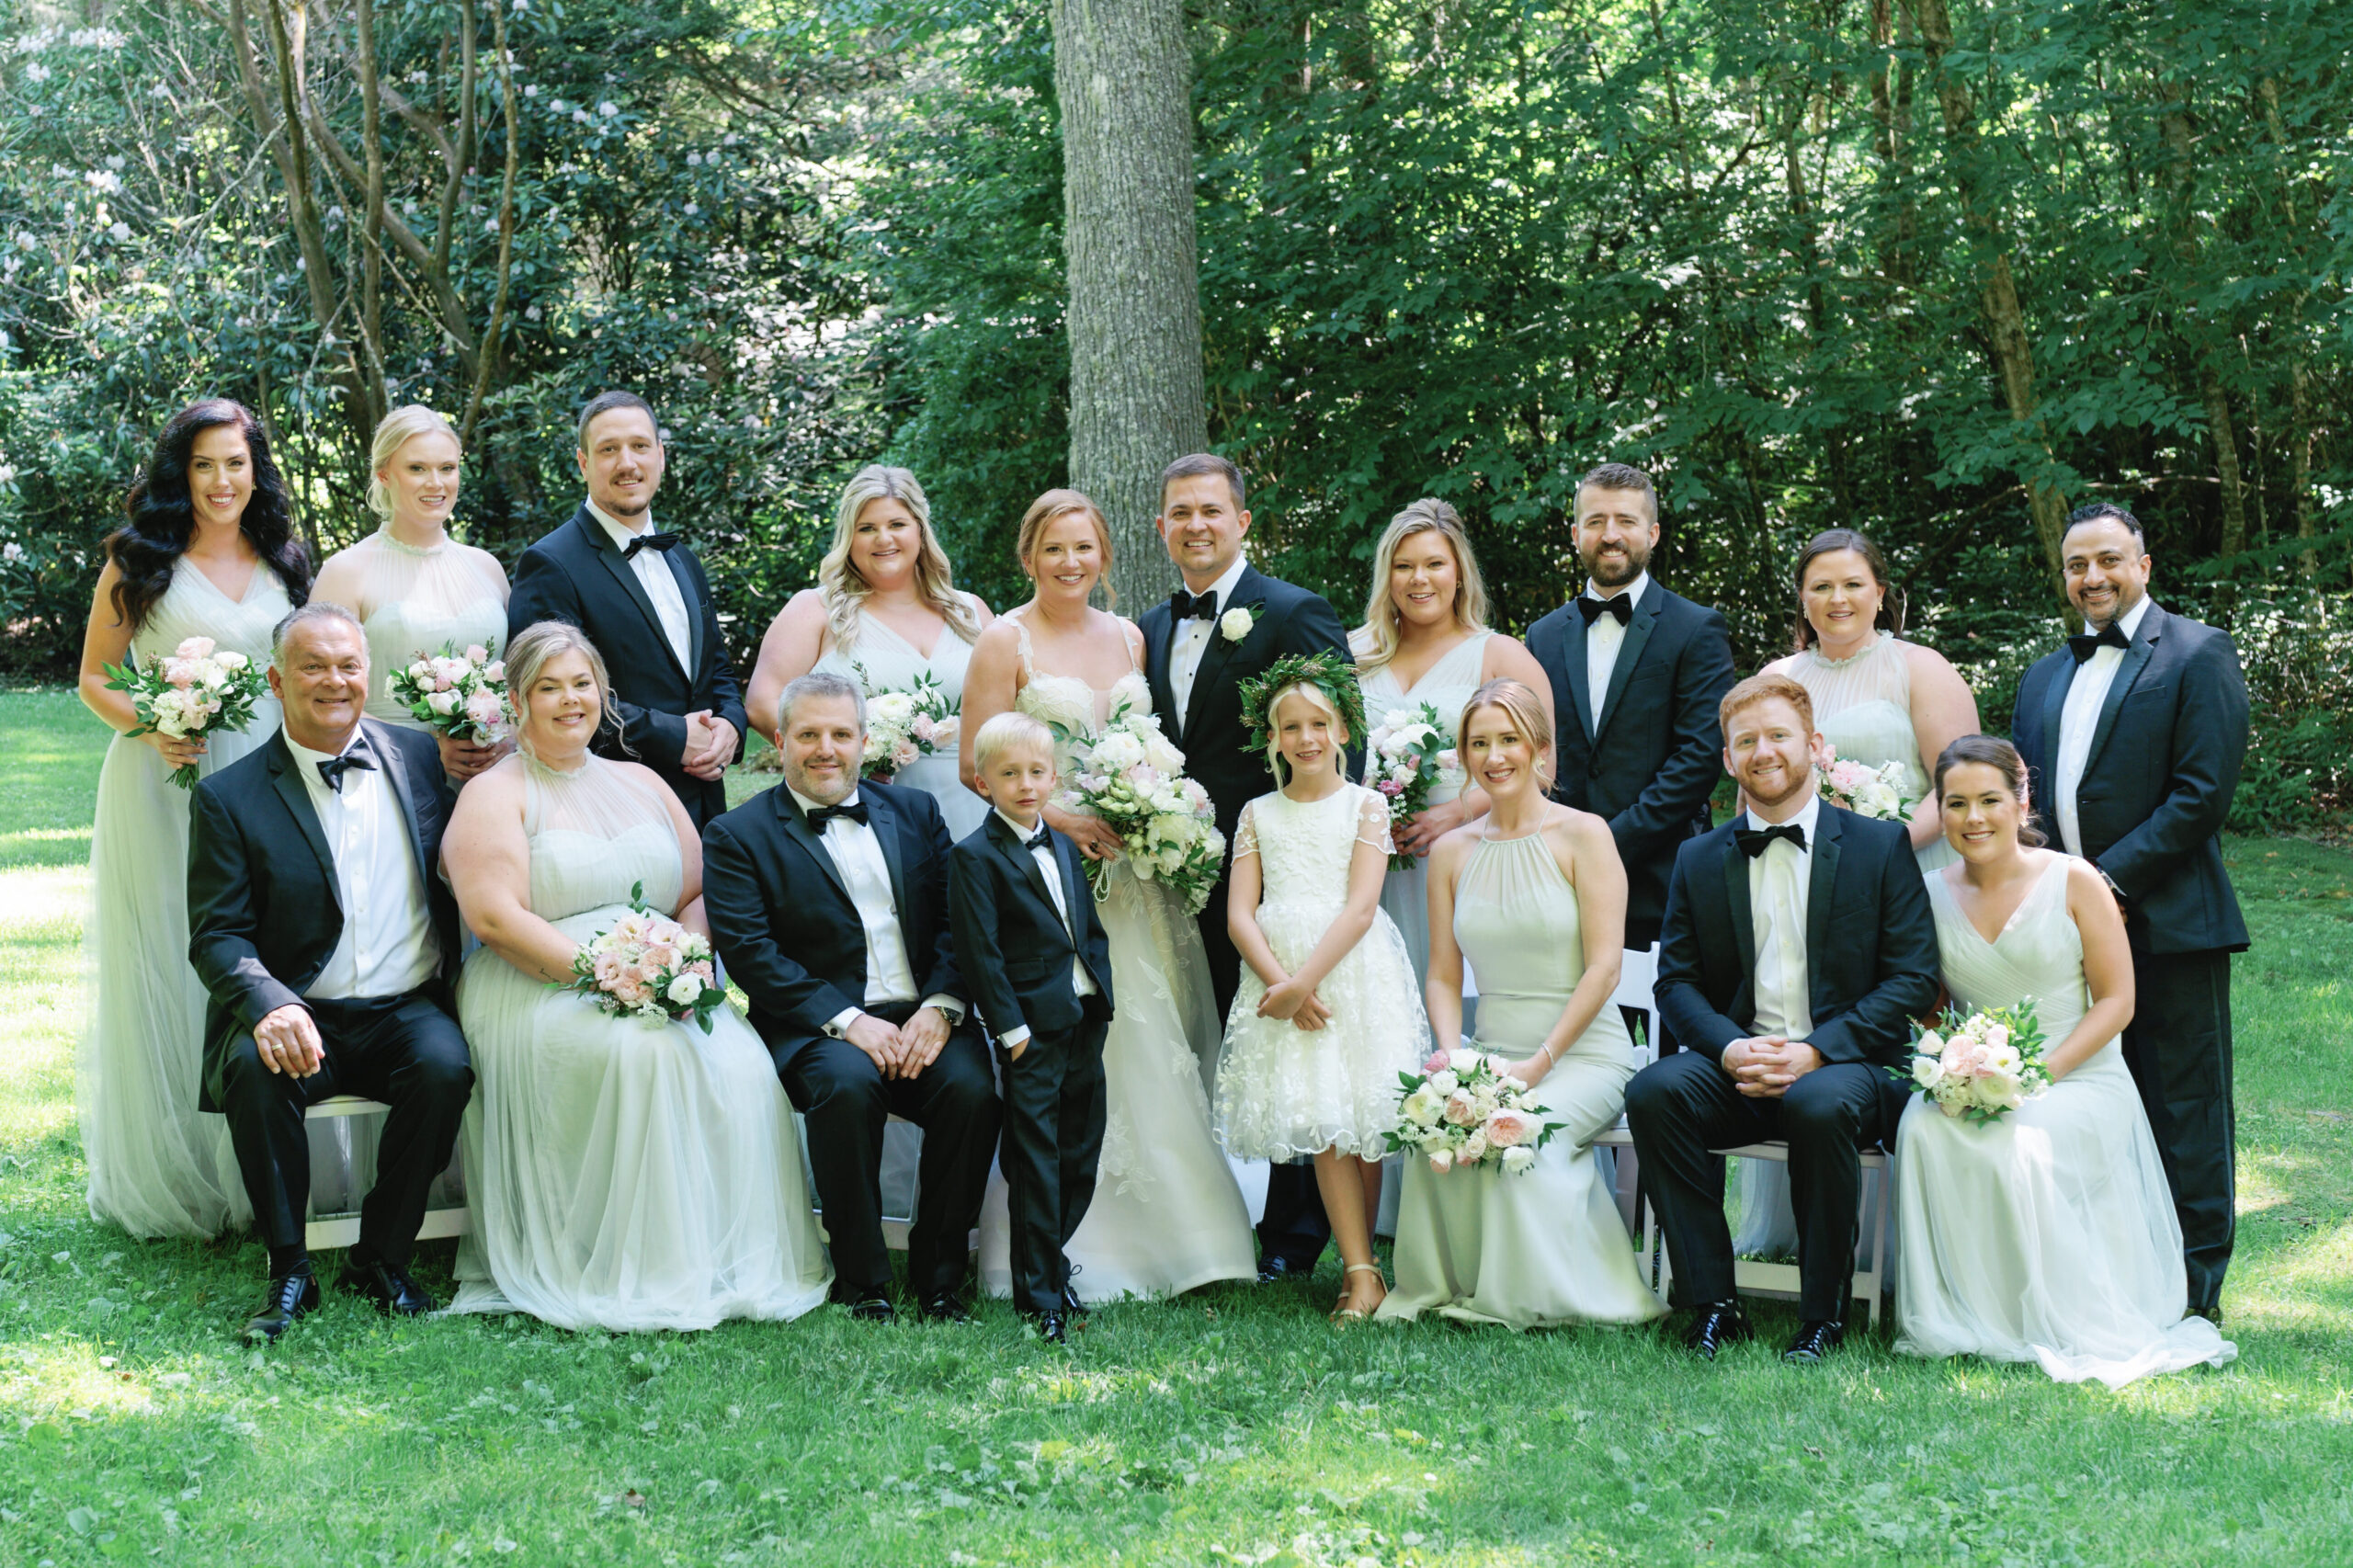 Formal seated photo of full bridal party. Summer destination wedding.